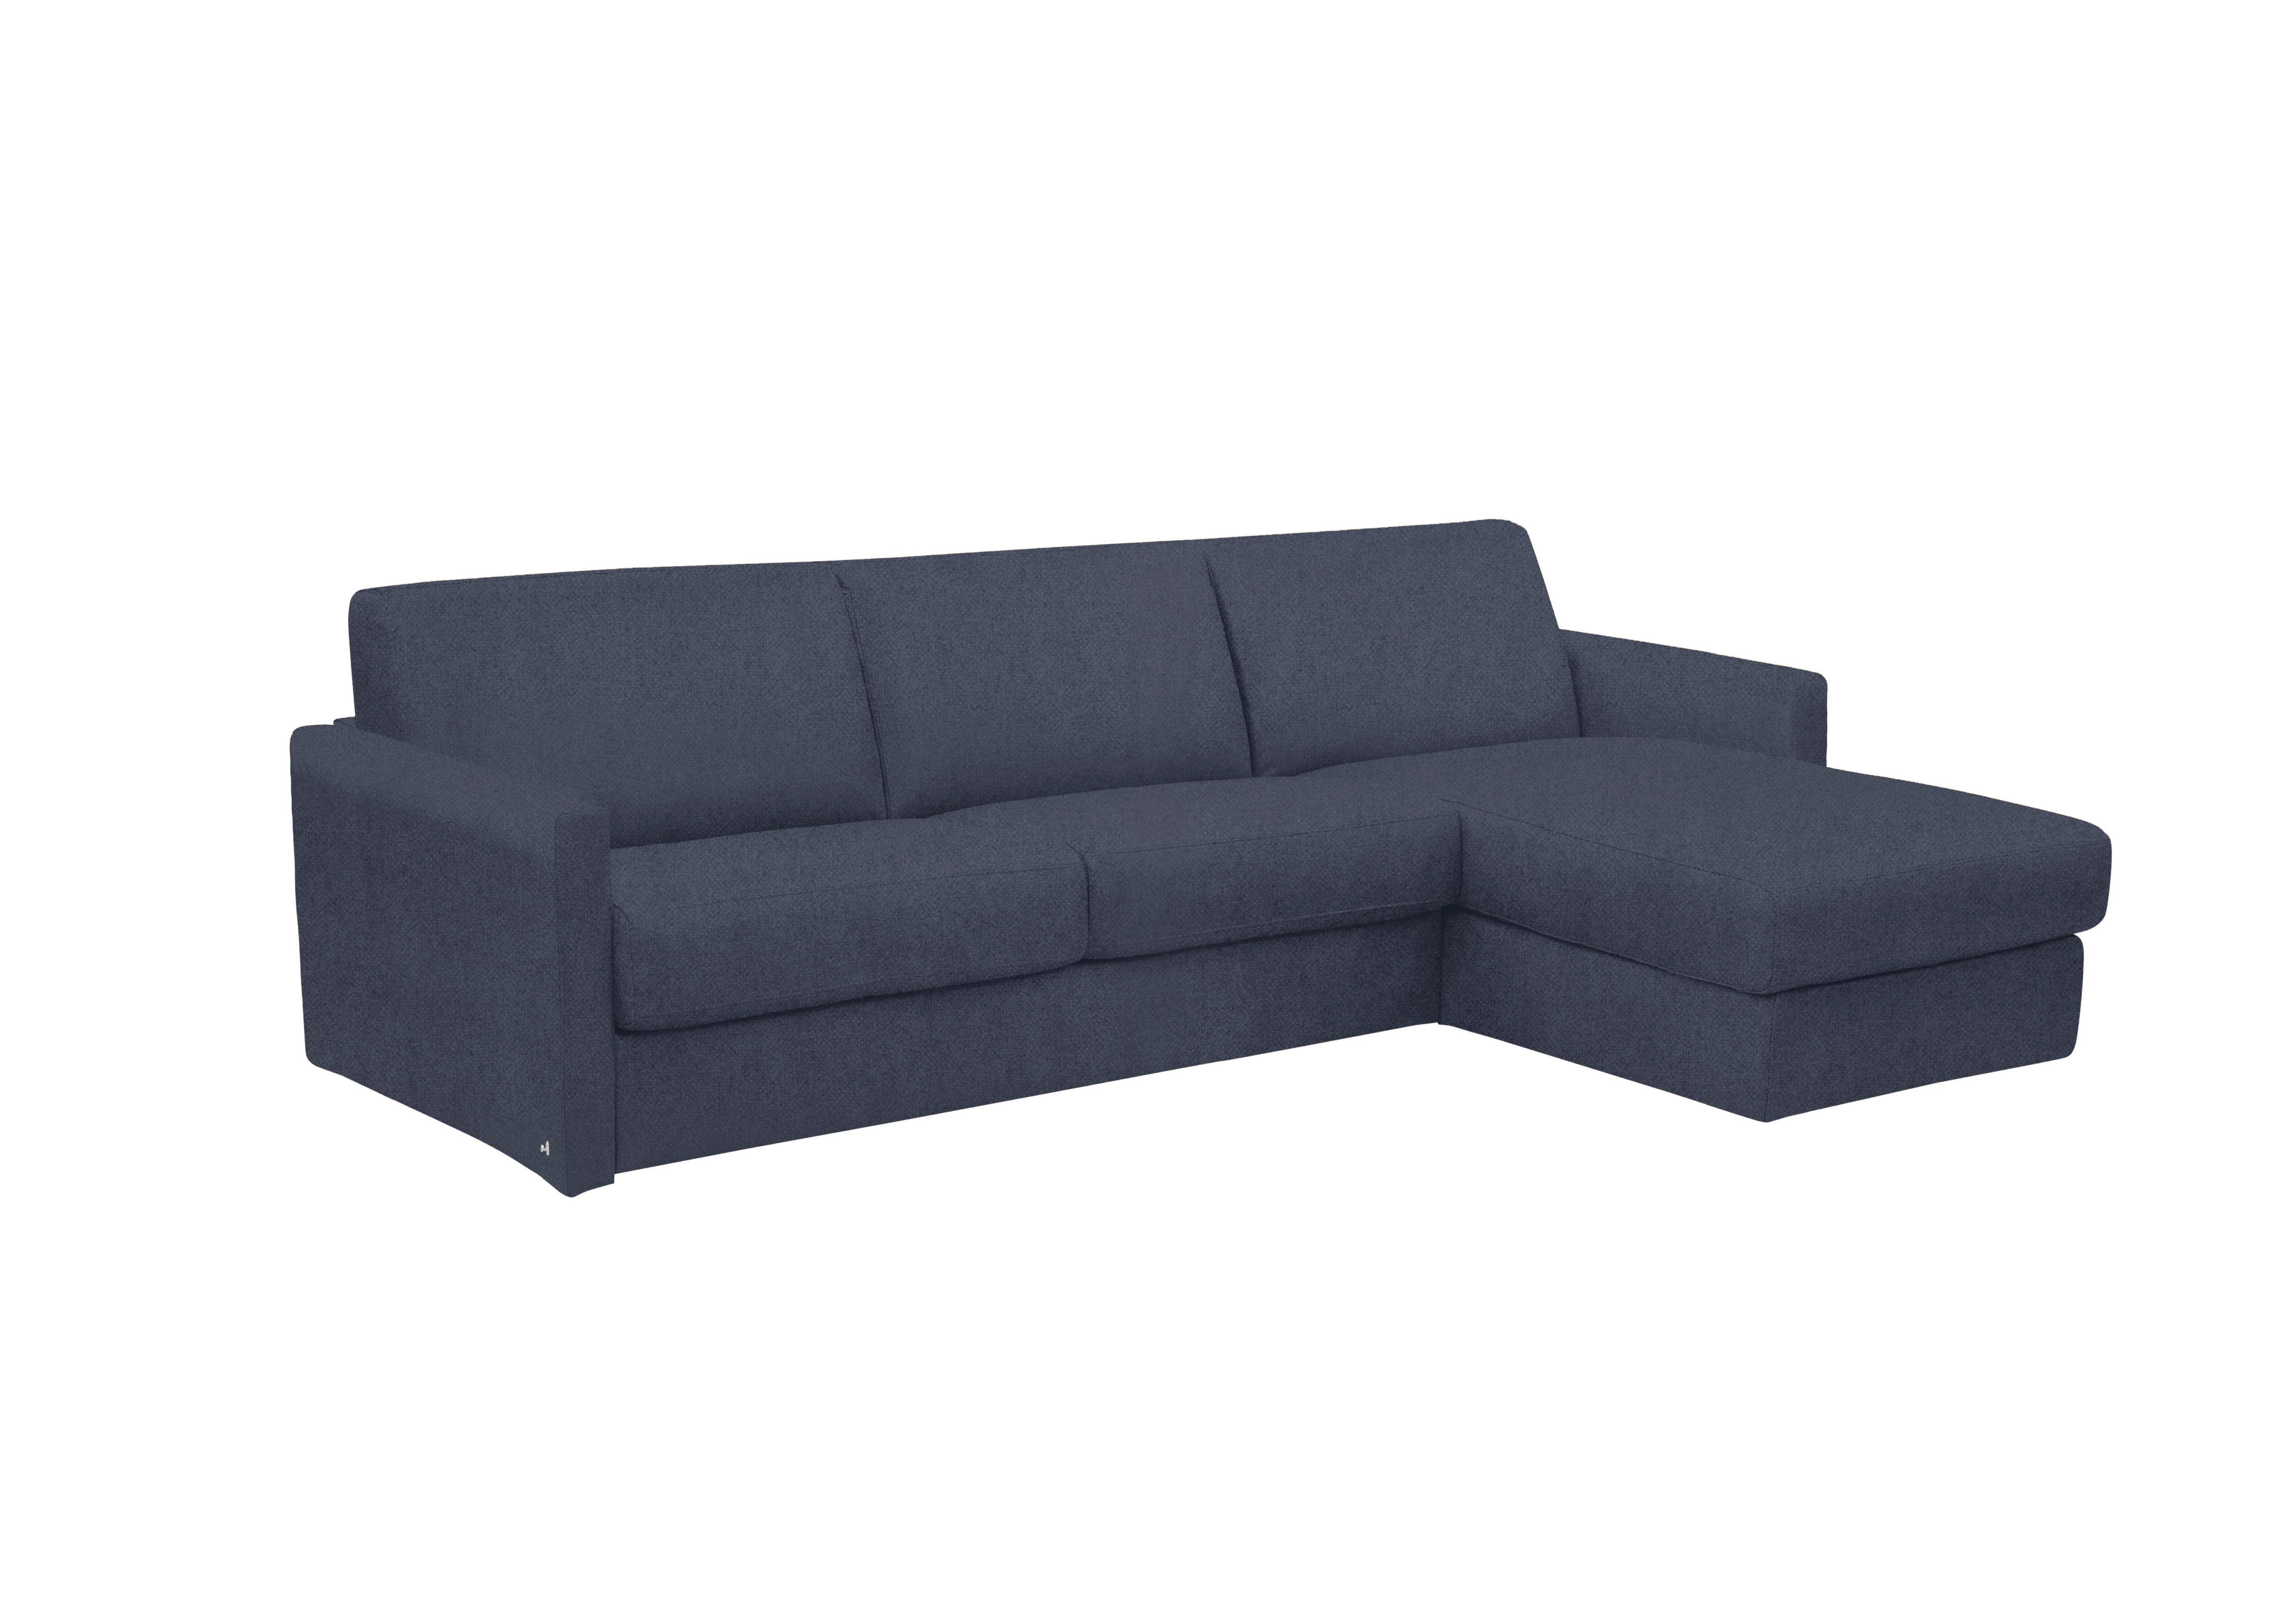 Alcova 3 Seater Fabric Sofa Bed with Storage Chaise with Slim Arms in Fuente Ocean on Furniture Village